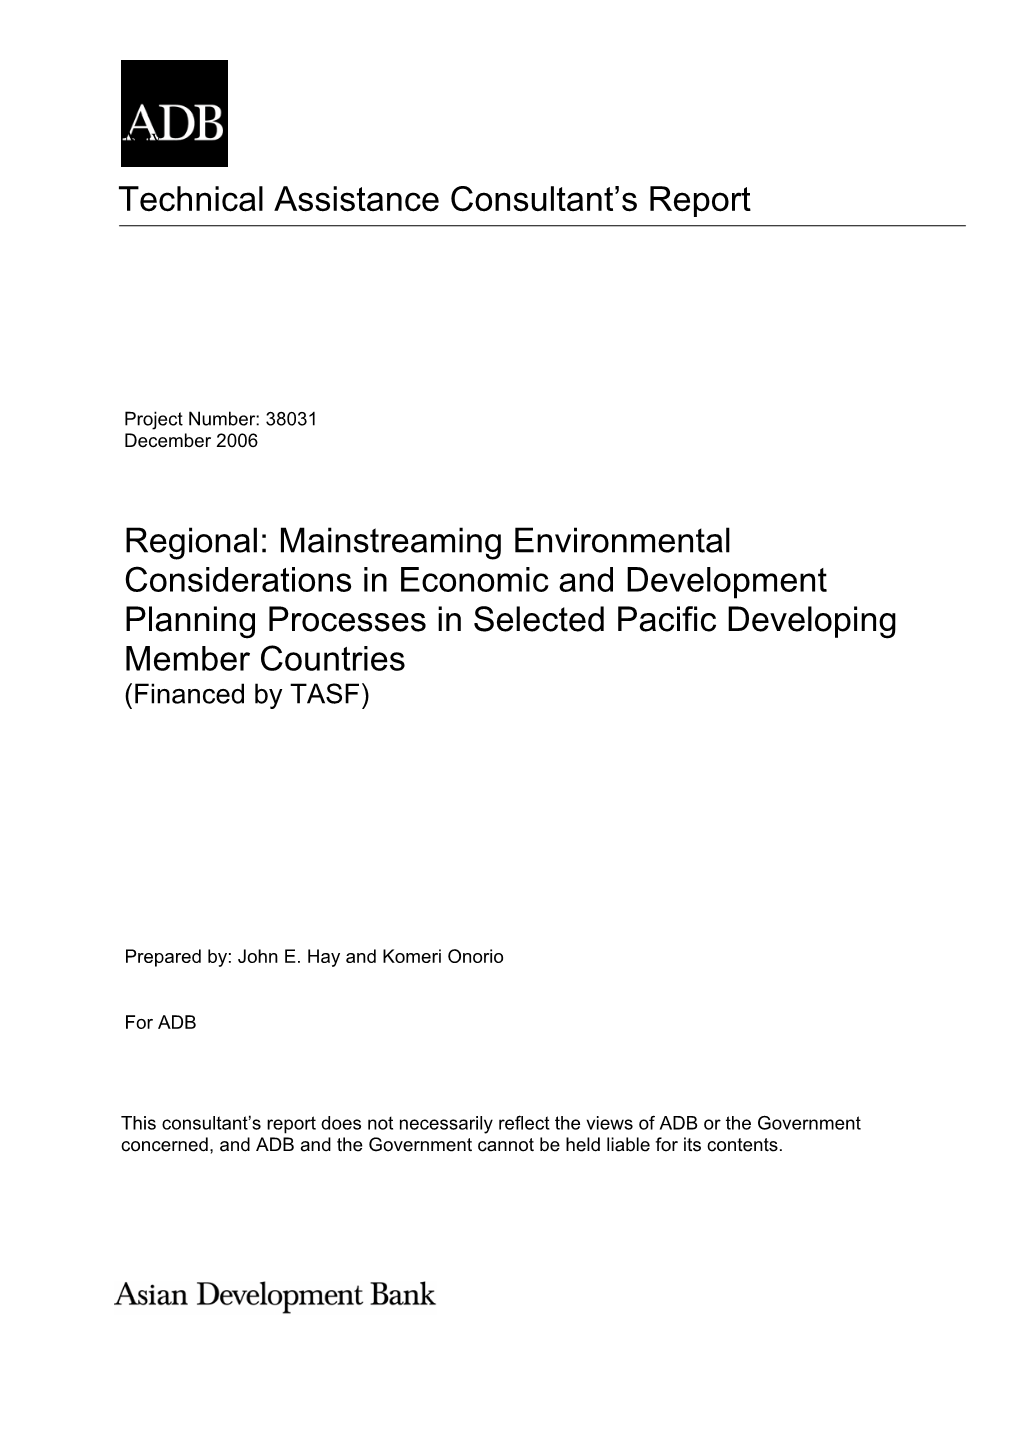 Mainstreaming Environmental Considerations in Economic and Development Planning Processes in Selected Pacific Developing Member Countries (Financed by TASF)